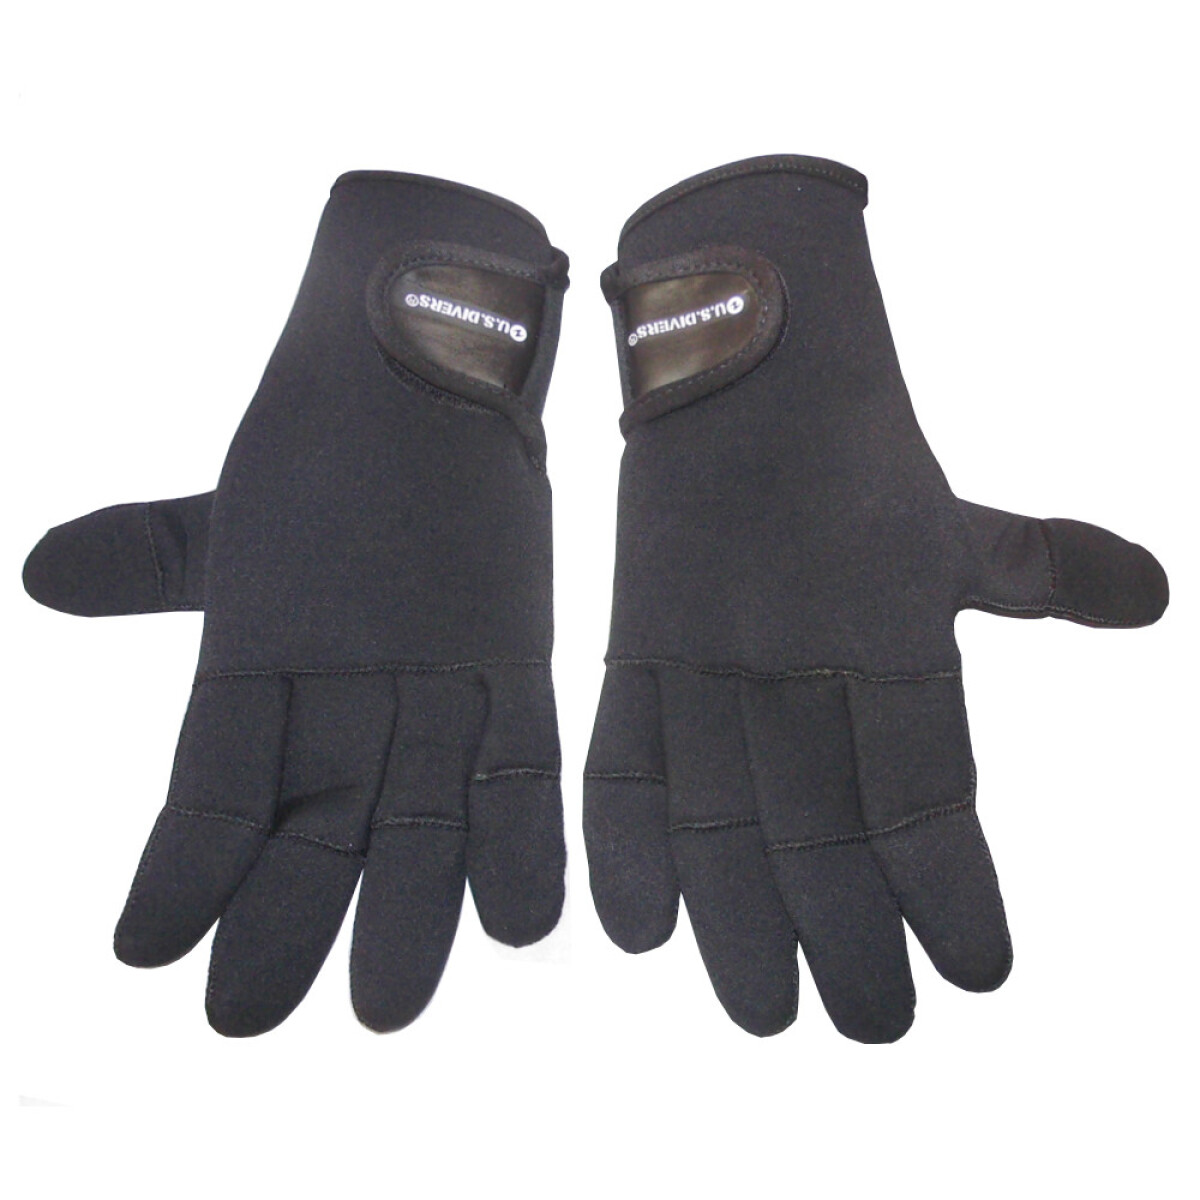 Usd - Guante Comfo-grip Sport 3MM Talle S -Color: Negro. - 001 